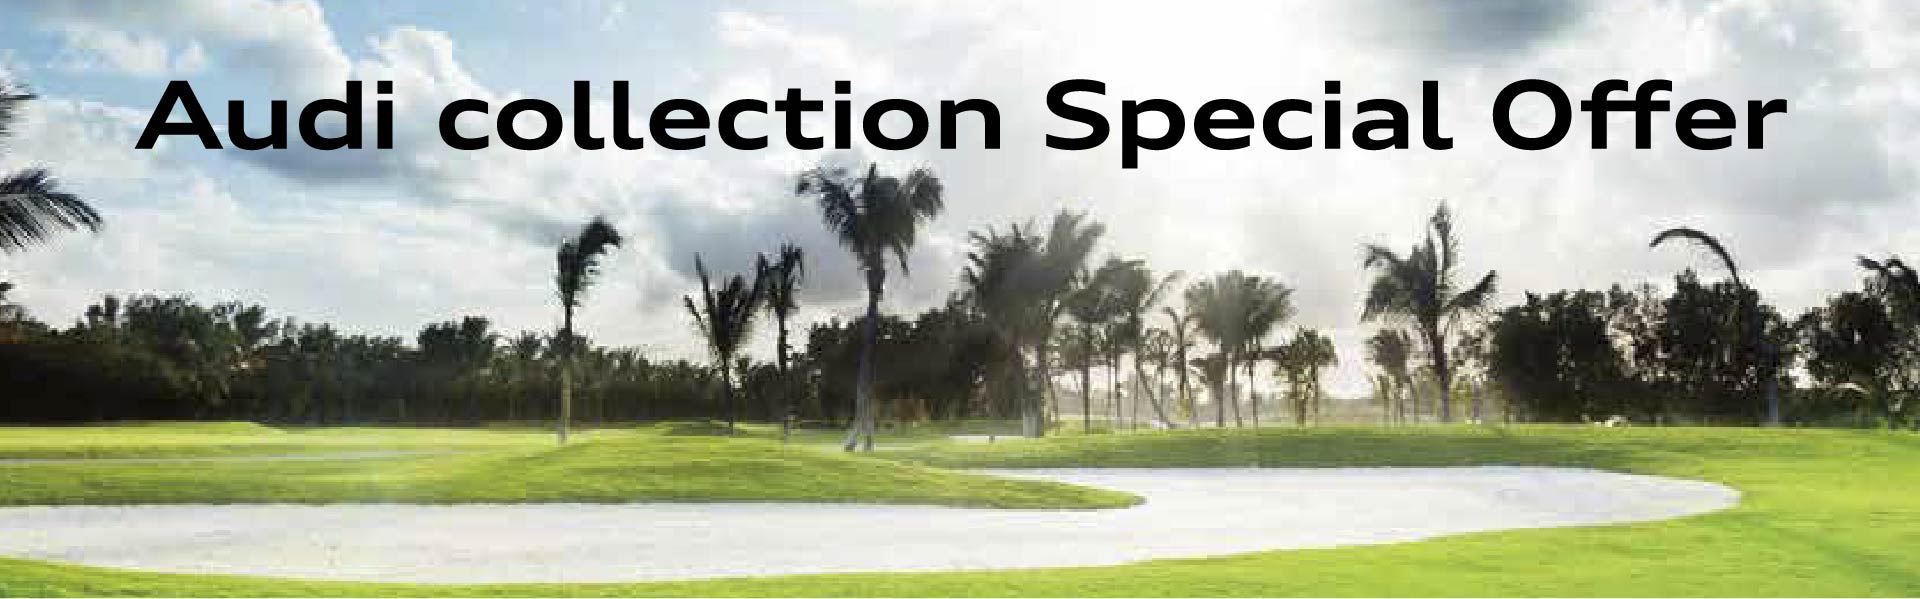 Audi collection Special Offer